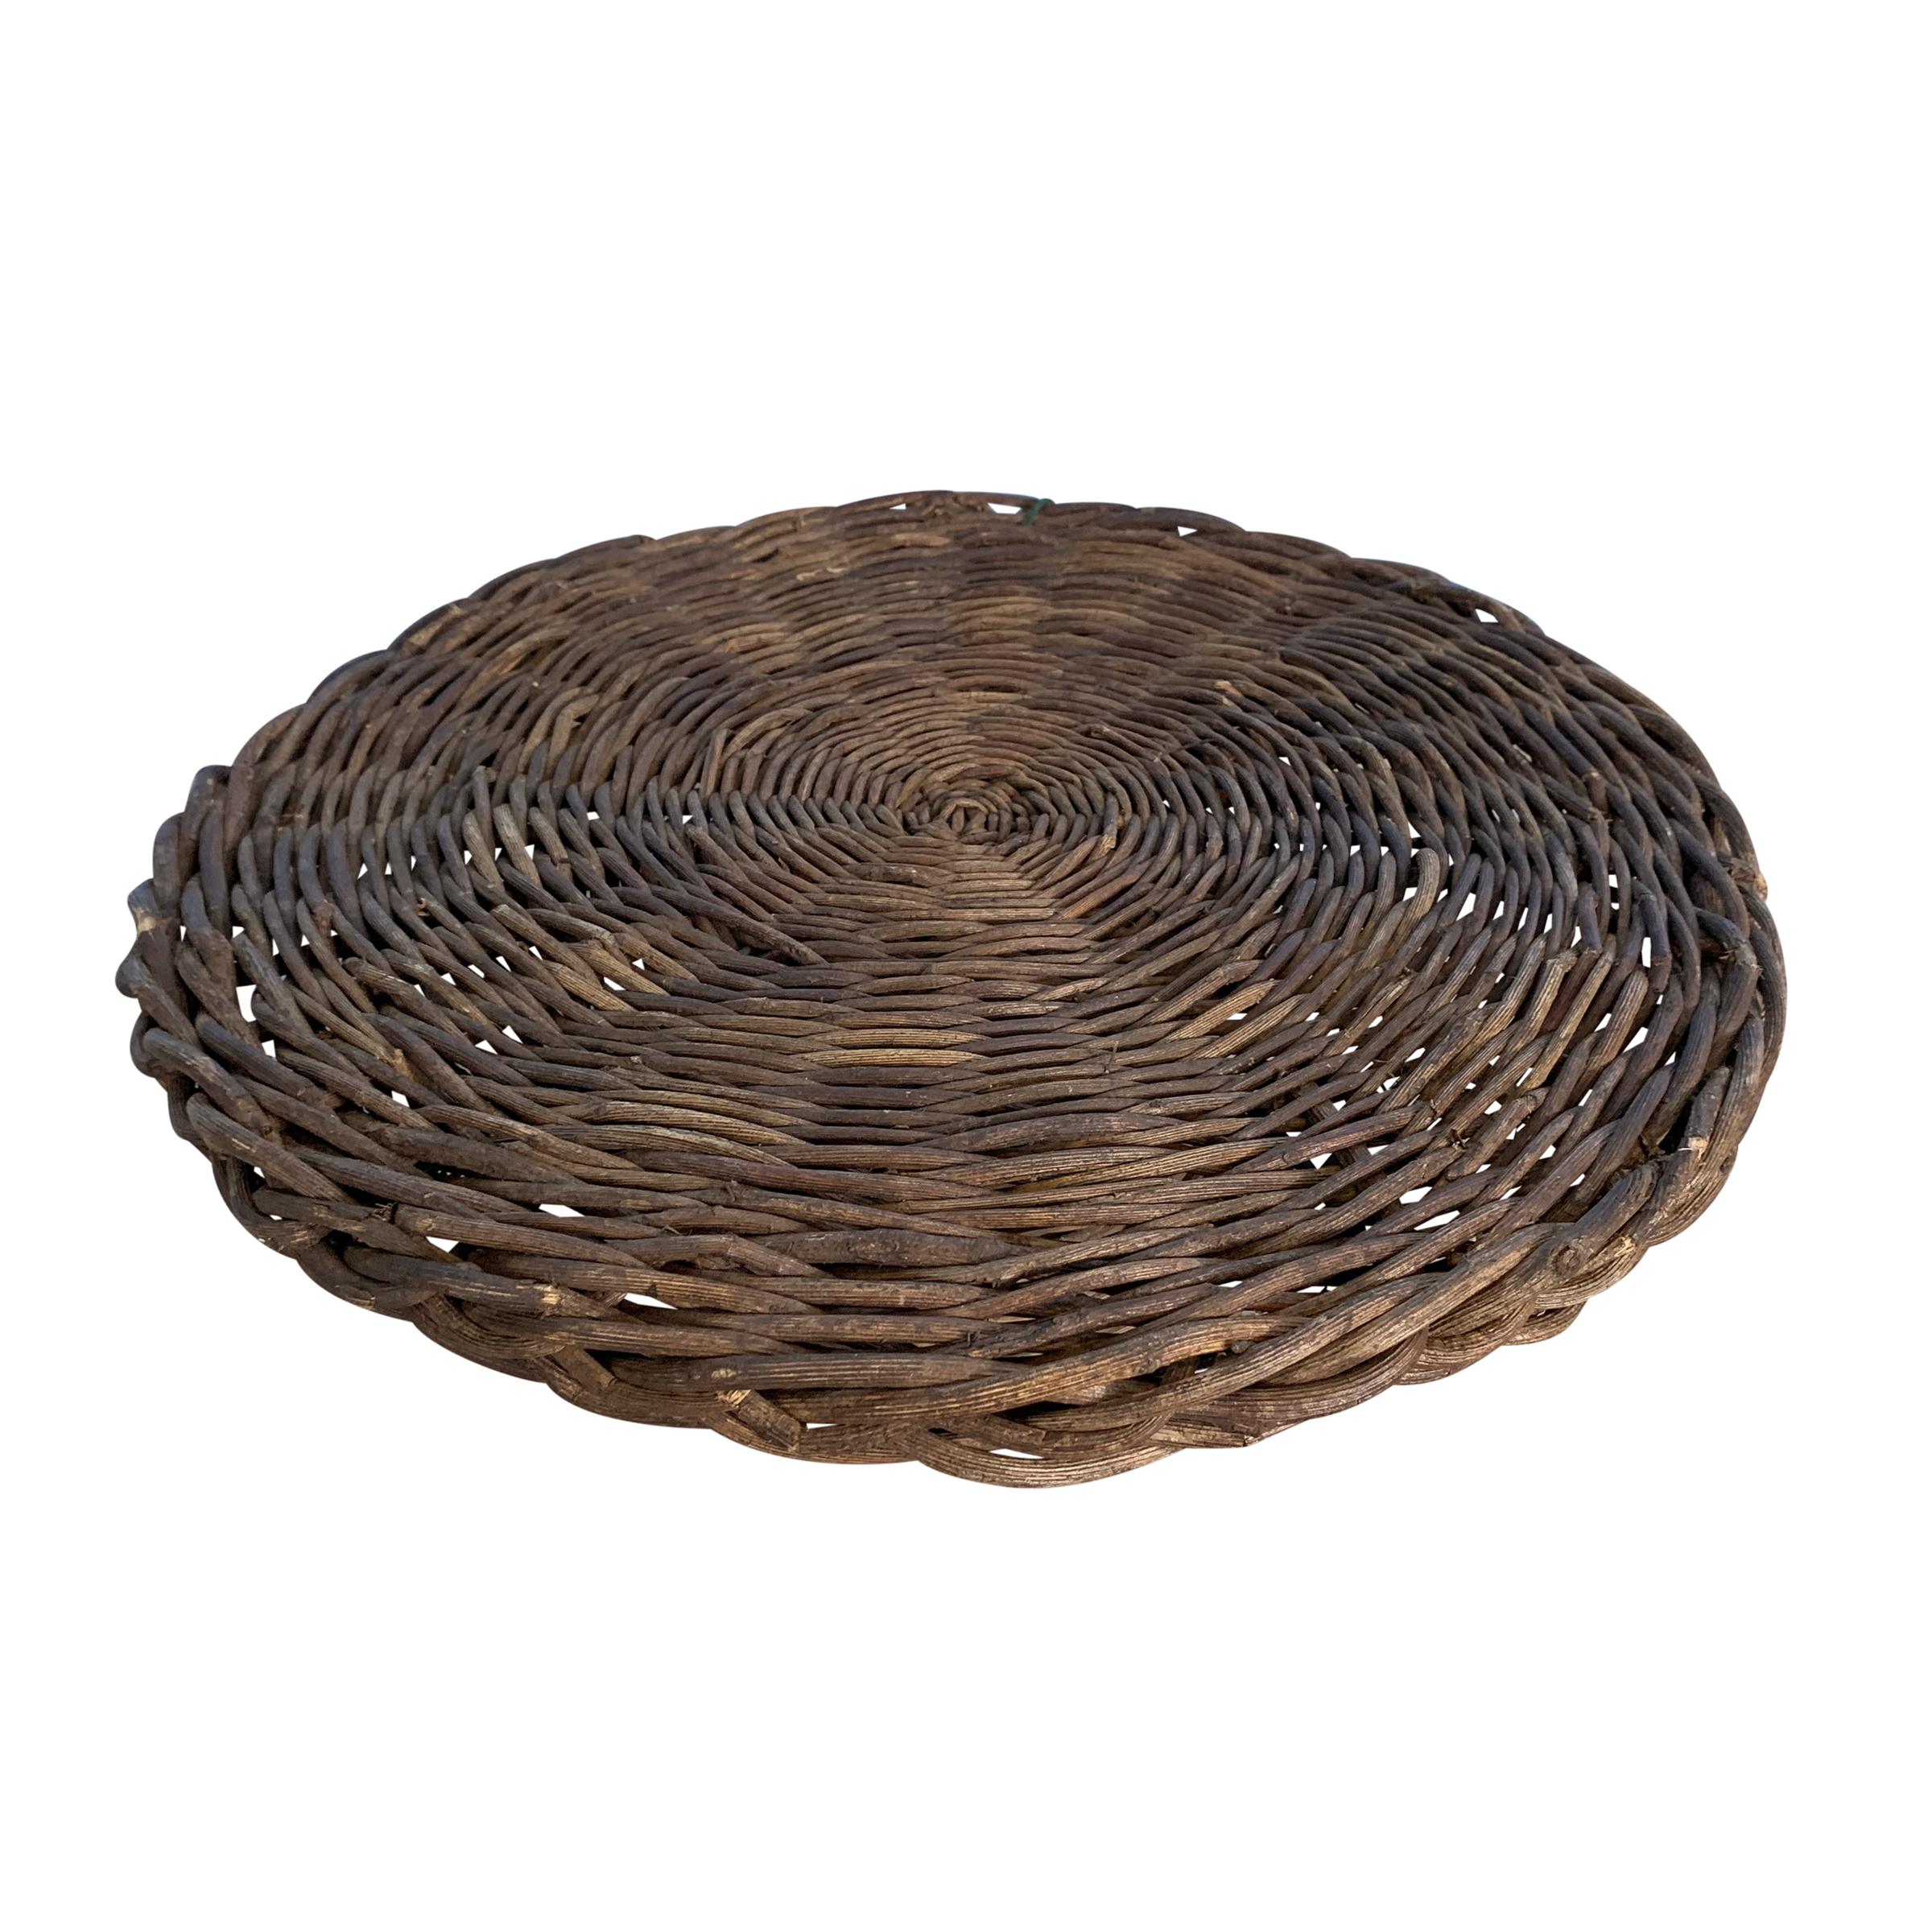 Rustic Woven Wicker Cake Stand